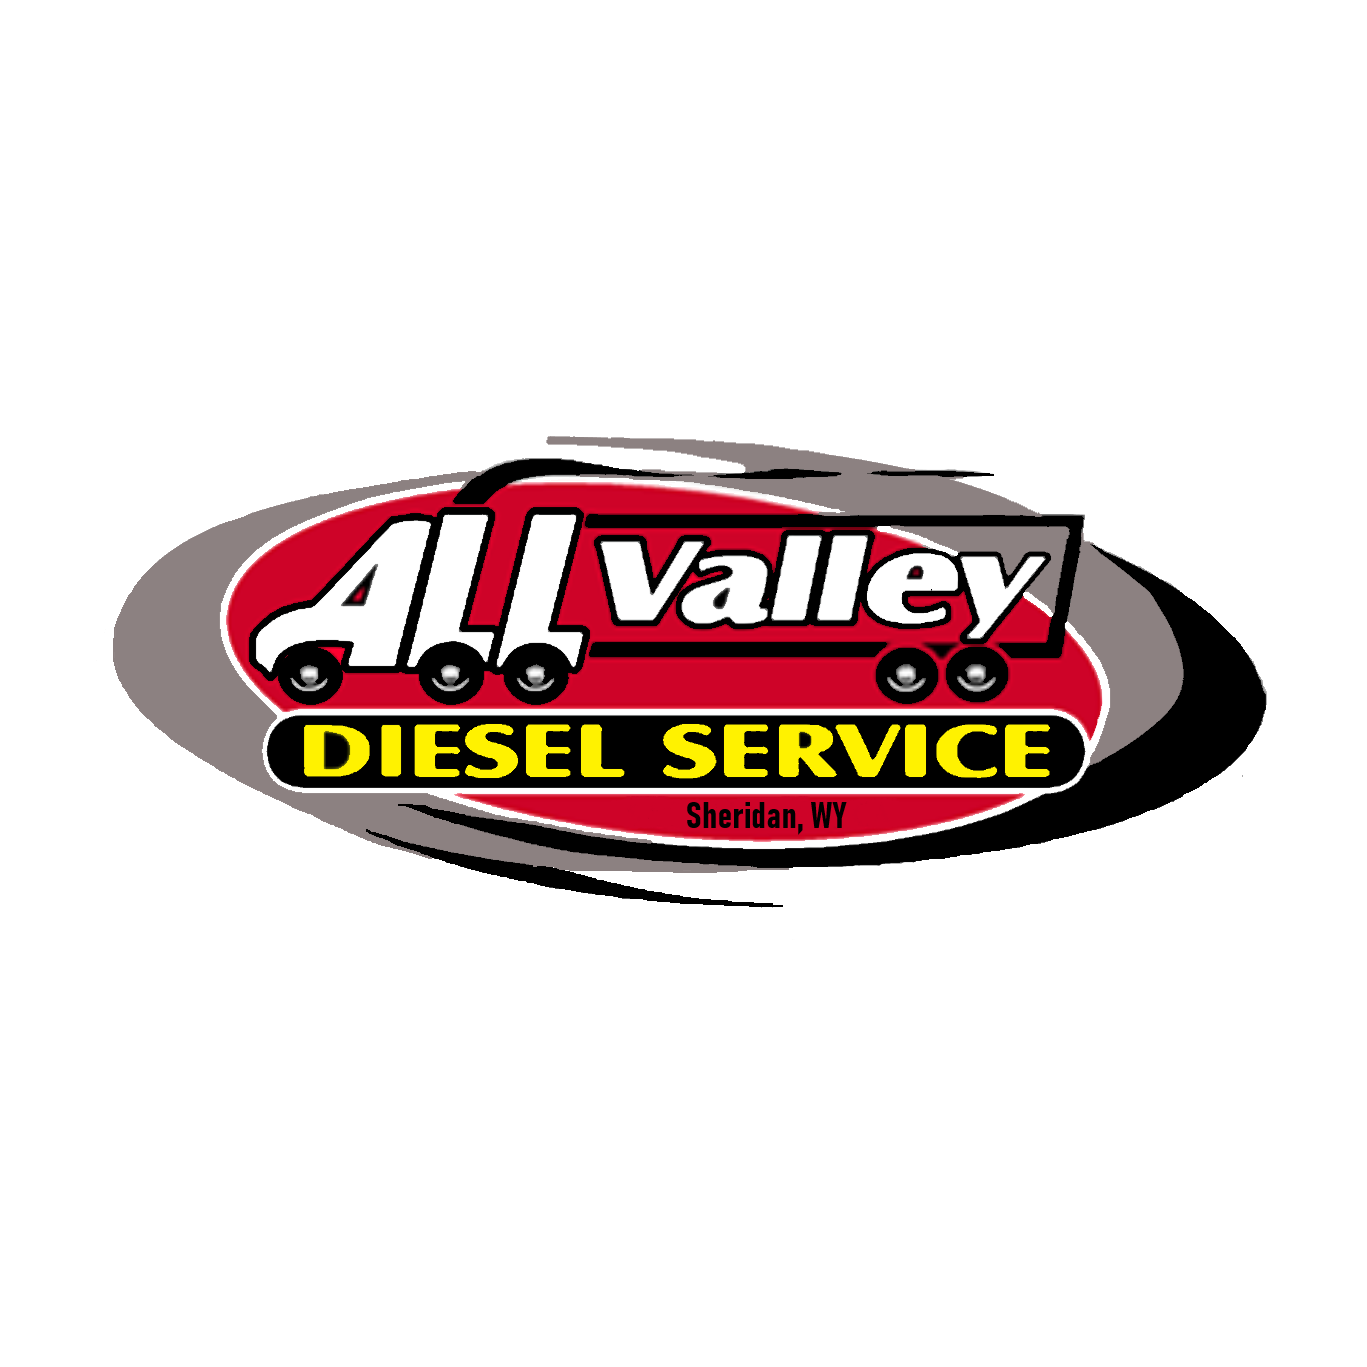 All Valley Diesel Service DBA Pert's Towing - Sheridan, WY 82801 - (307)217-0025 | ShowMeLocal.com